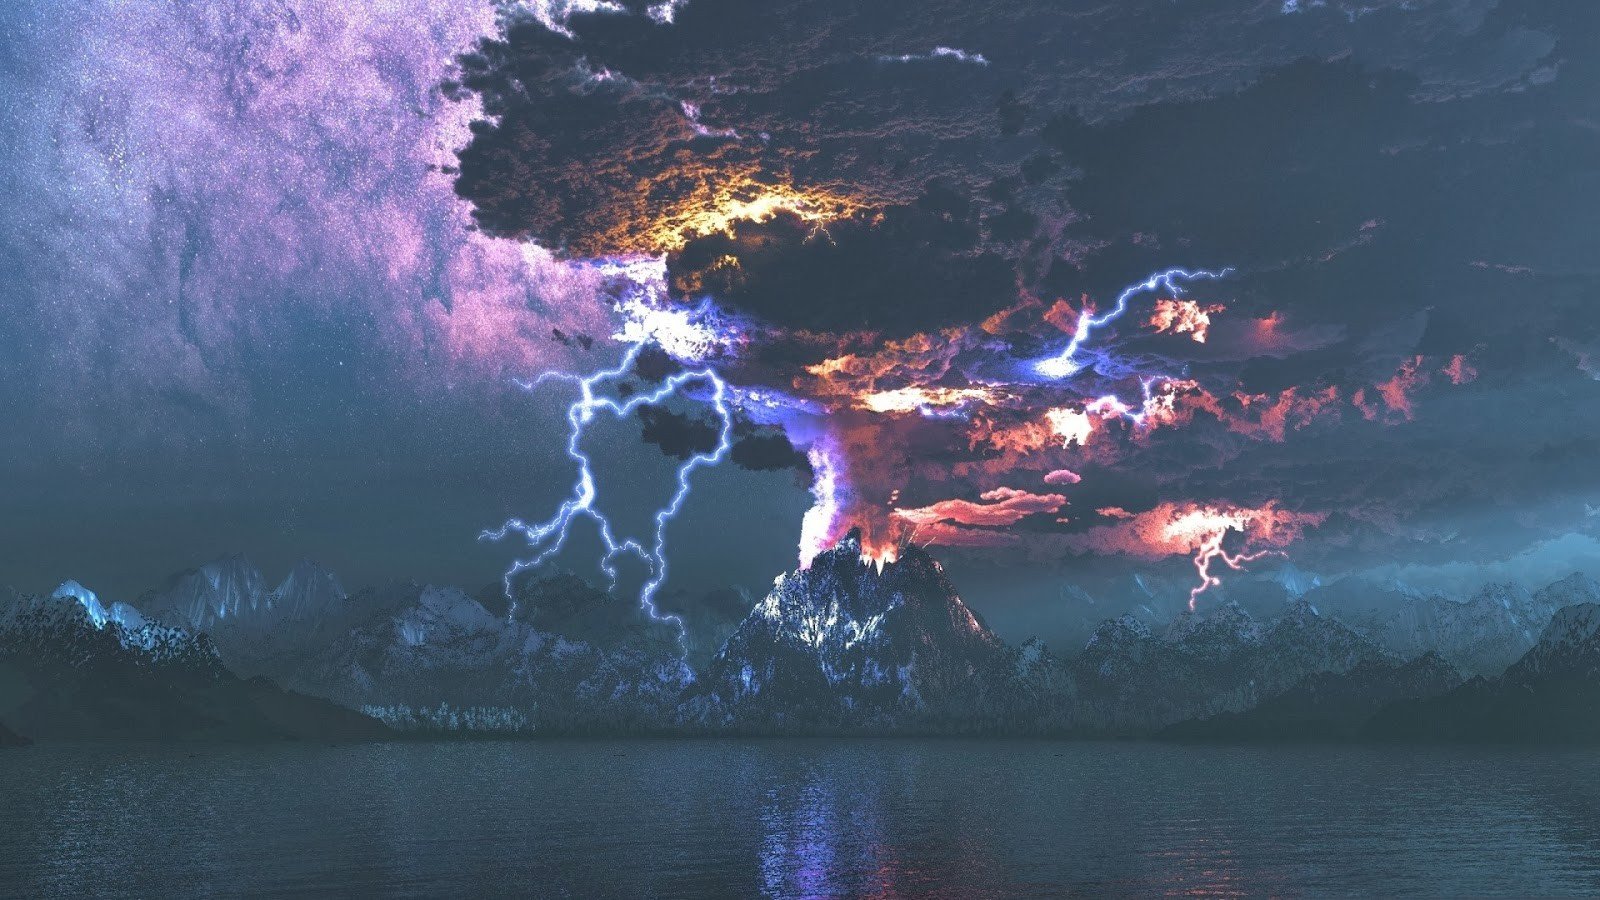 Watch the Photo by Schadenfreude with the username @Schadenfreude, posted on December 28, 2016 and the text says 'witchy14you:

rylutz:


Nature; the most beautiful and serene is often the most ruthless and destructive


Would have loved to too have seen that ! #nature  #Thunder  #powerful  #nature  #reference  #stormy  #storm  #magic  #scary'